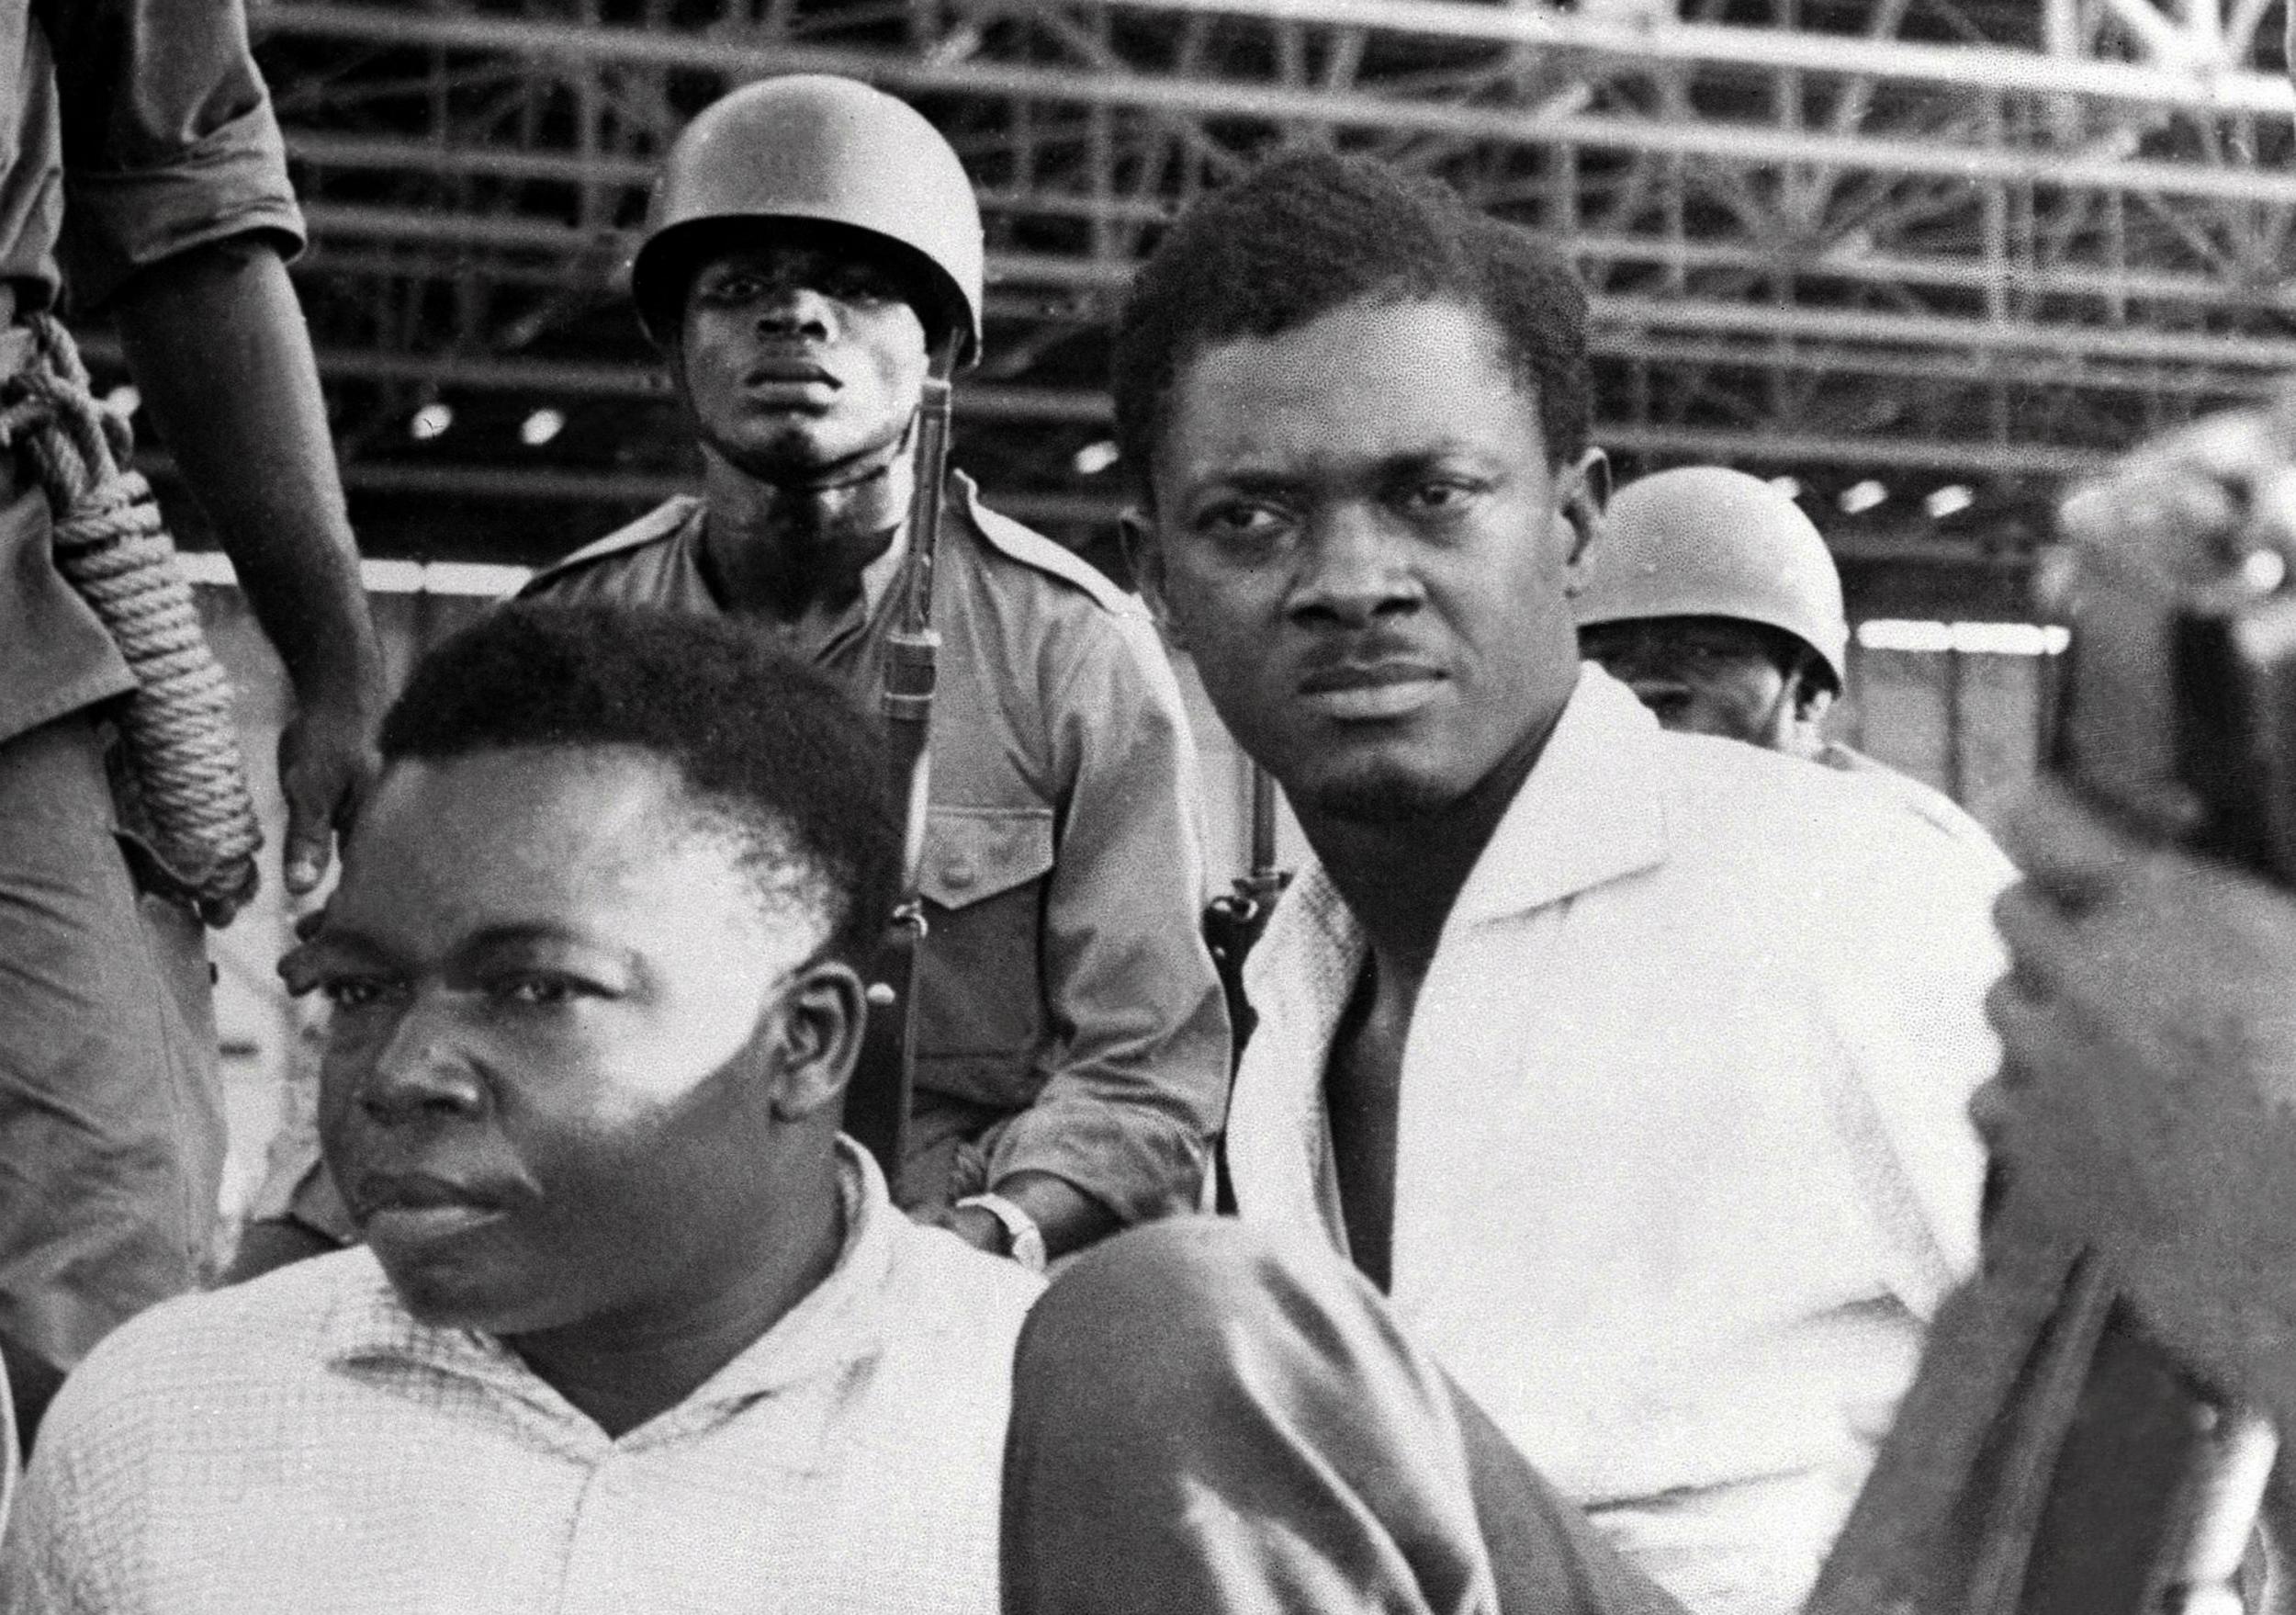 A picture taken in December 1960, shows soldiers guarding Patrice Lumumba (R), Prime Minister of then Congo-Kinshasa.